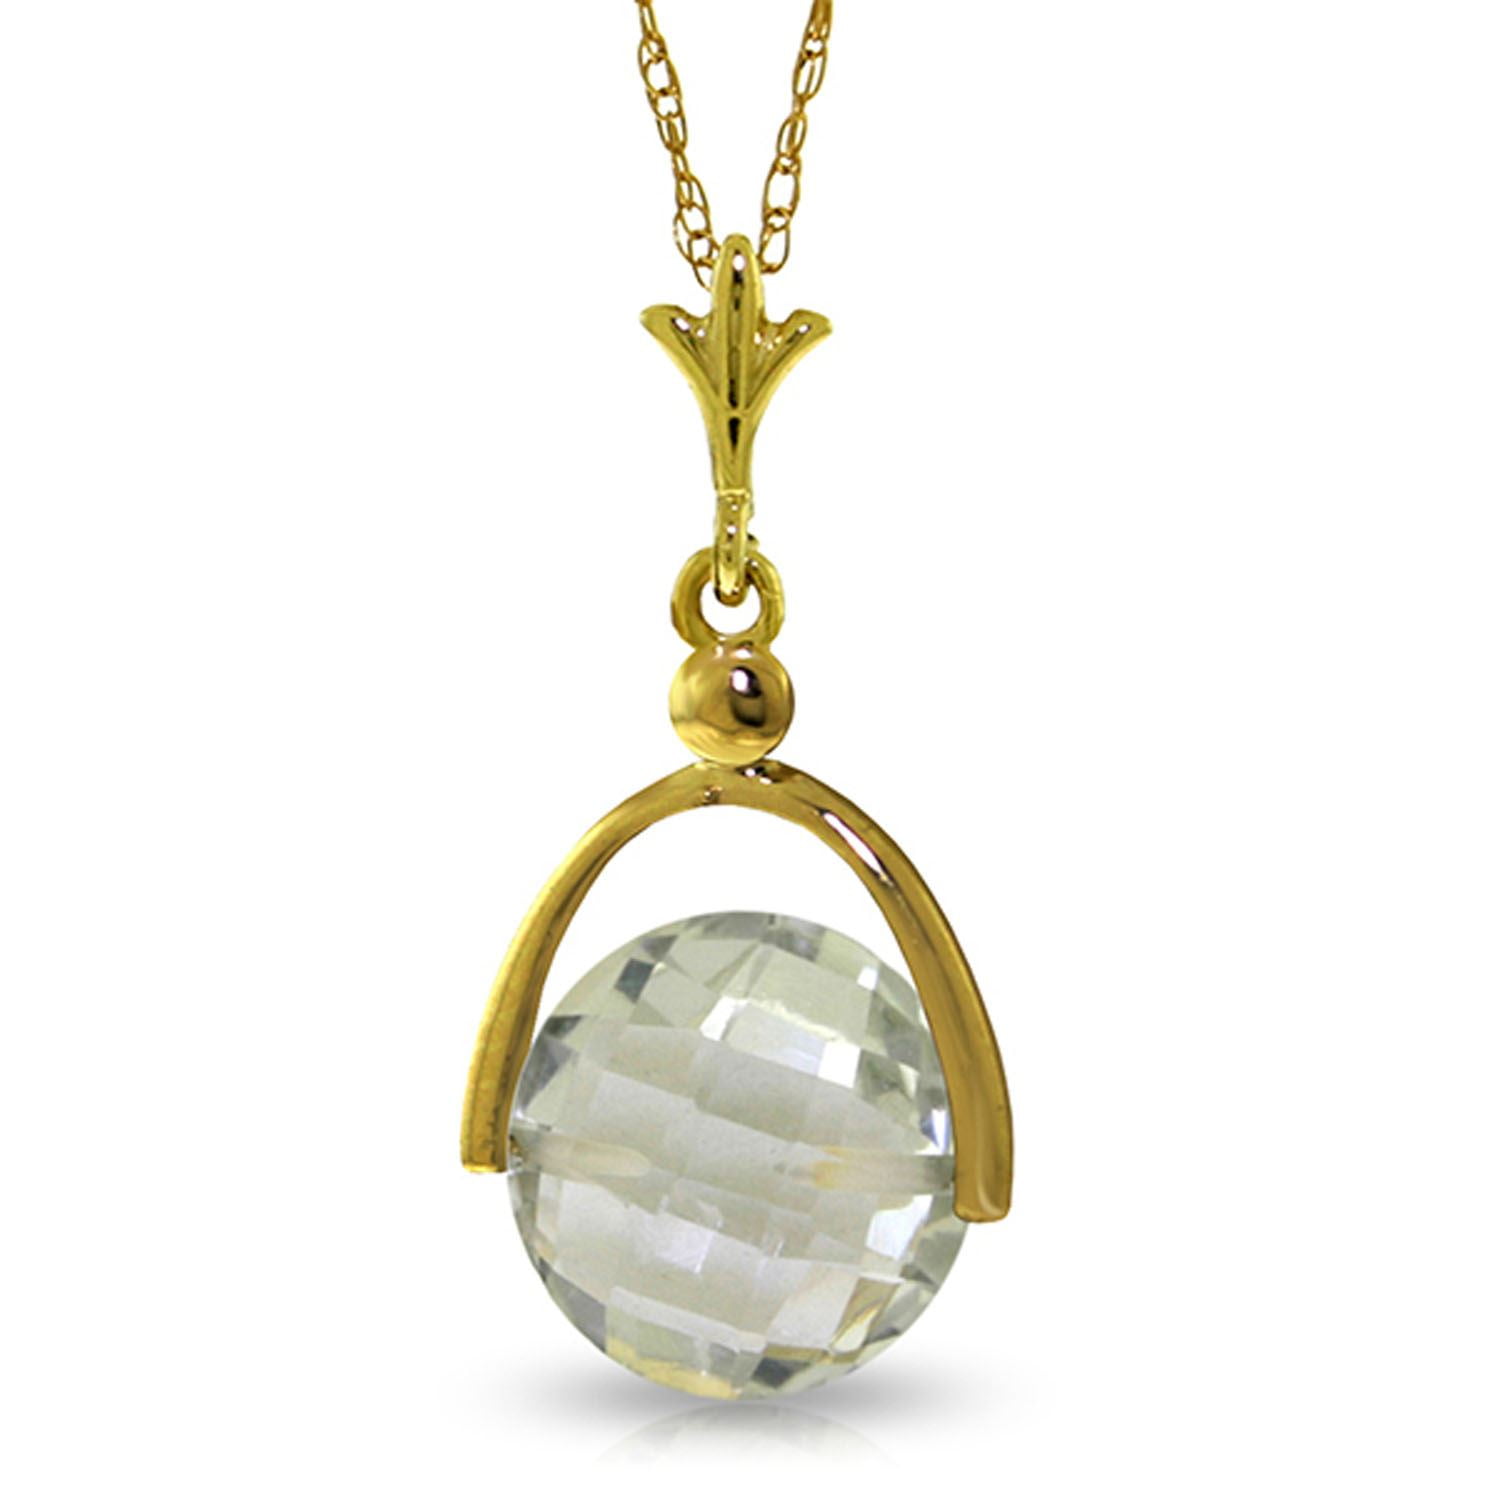 ALARRI 3.25 CTW 14K Solid Gold Necklace Checkerboard Cut Green Amethyst with 20 Inch Chain Length